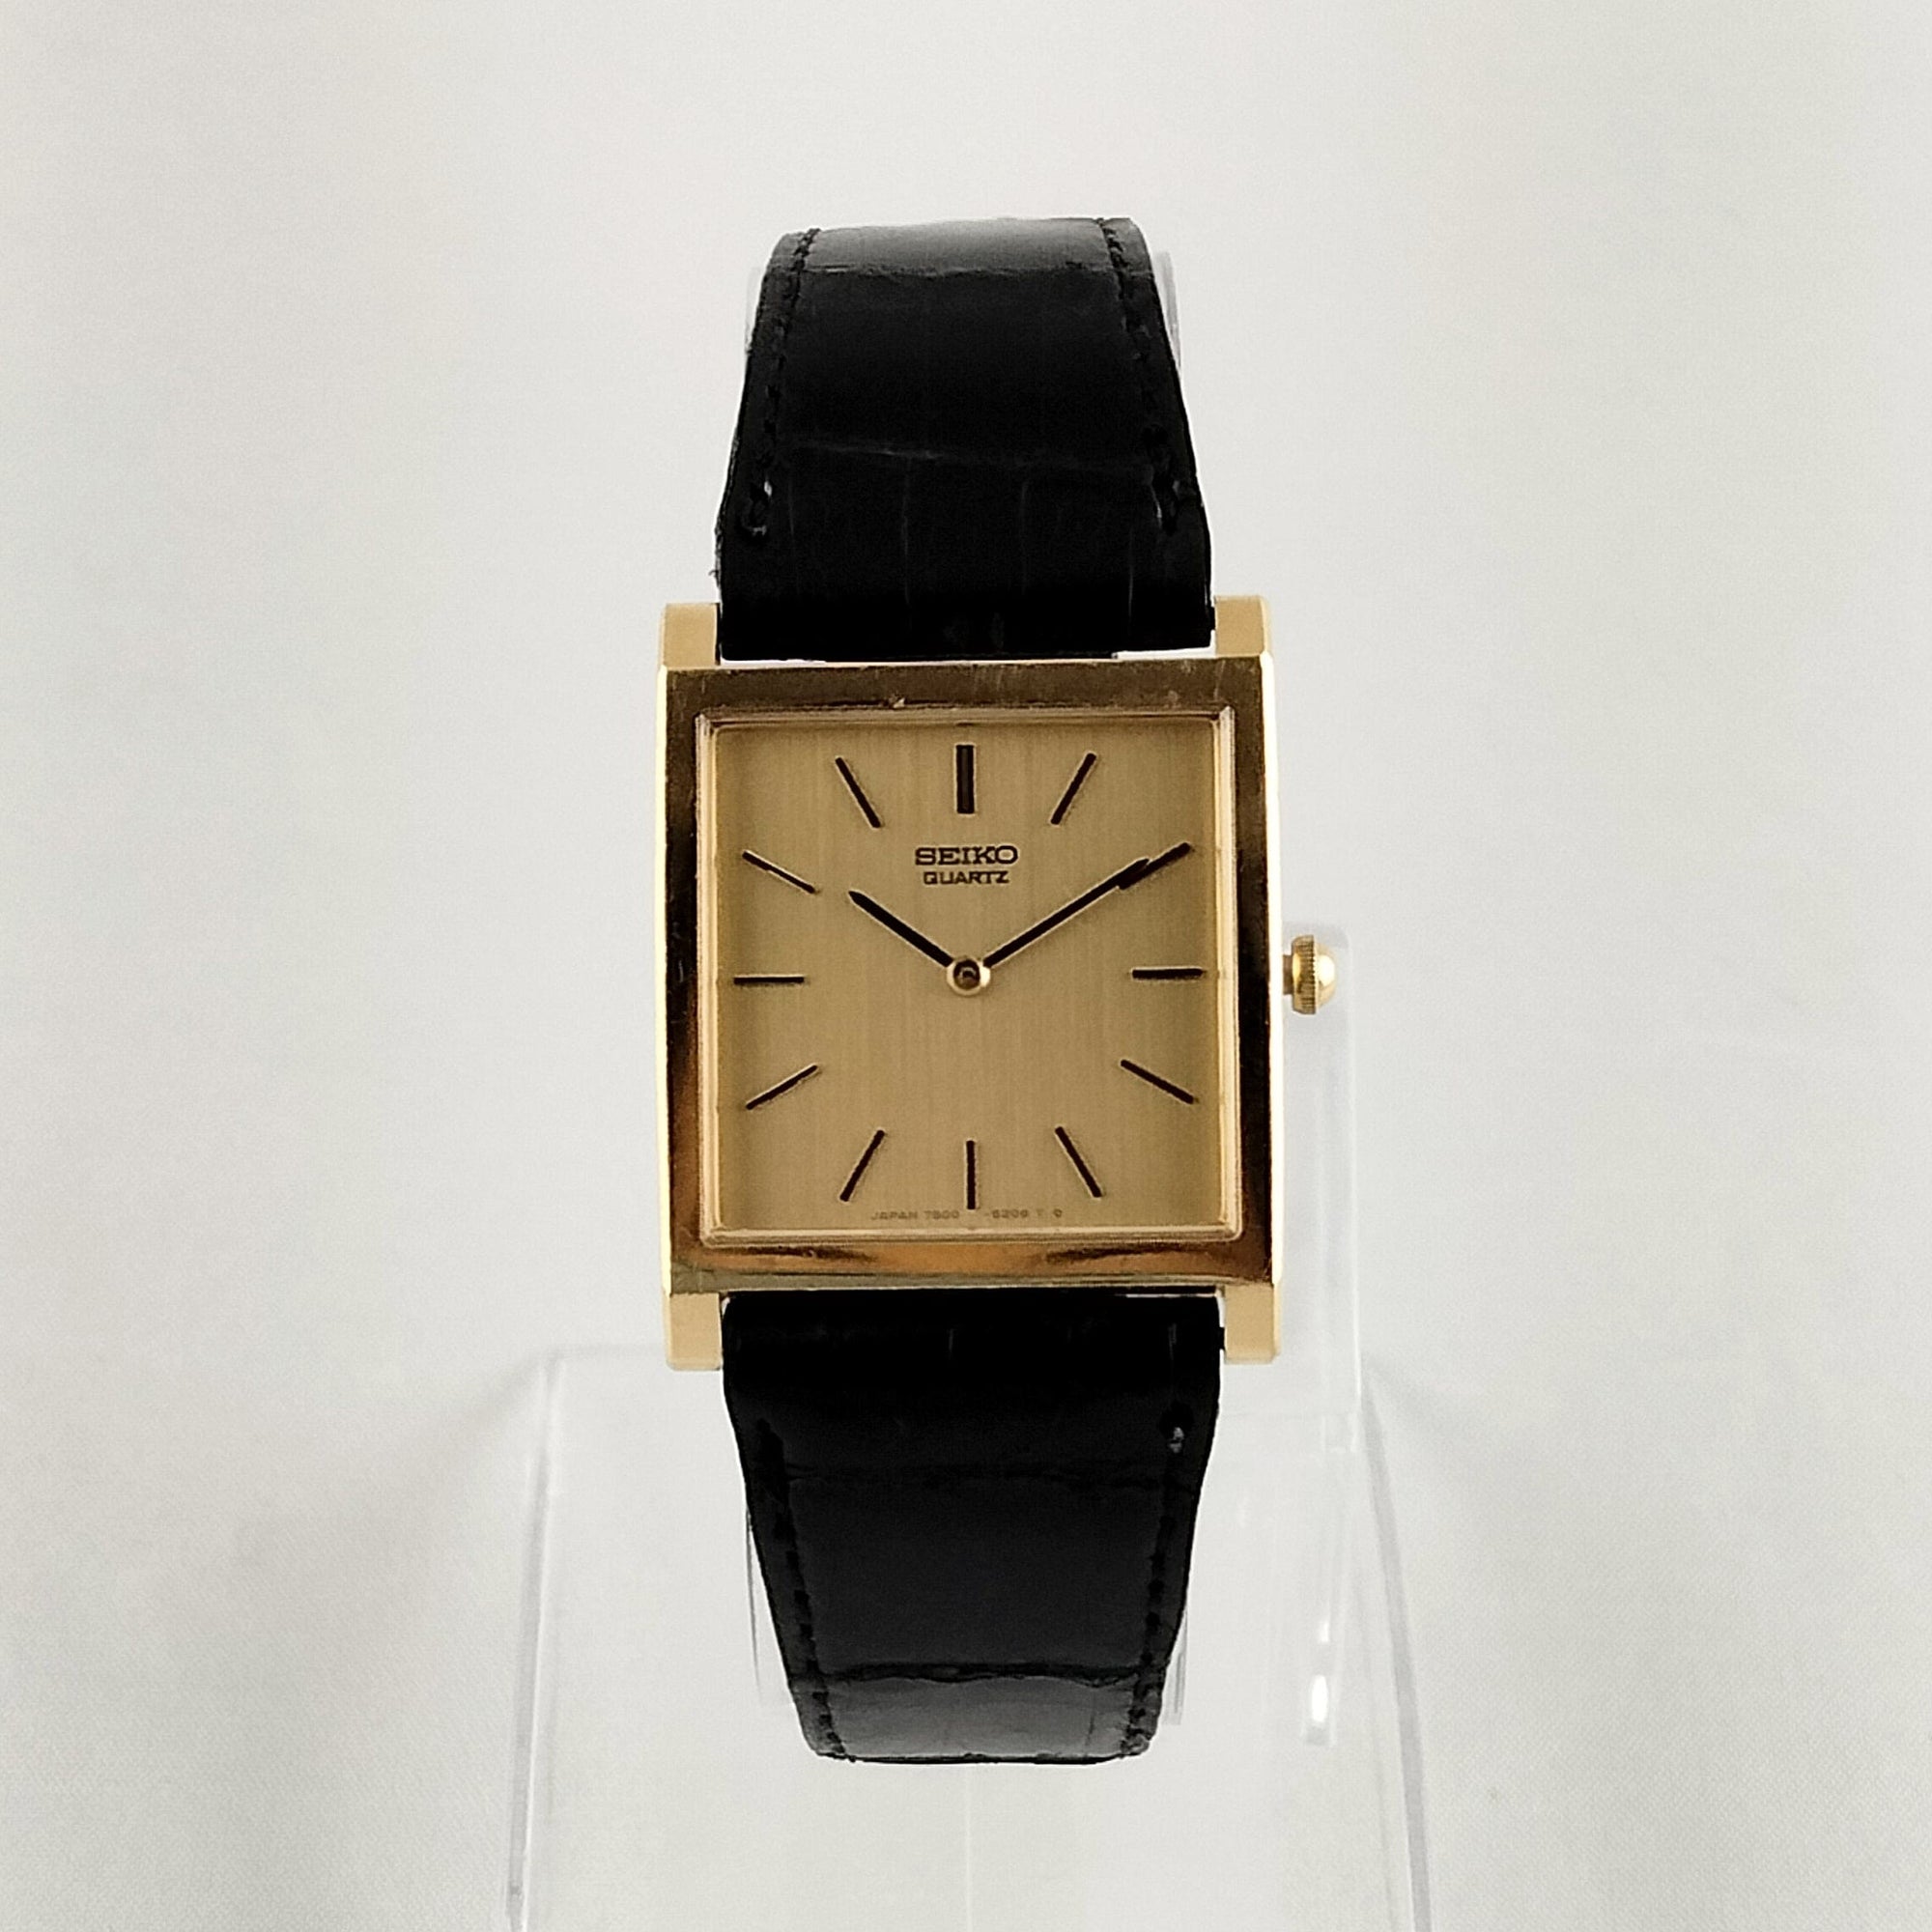 I Like Mikes Mid Century Modern Watches Seiko Unisex Watch, Gold Tone Square Dial, Genuine Black Leather Strap